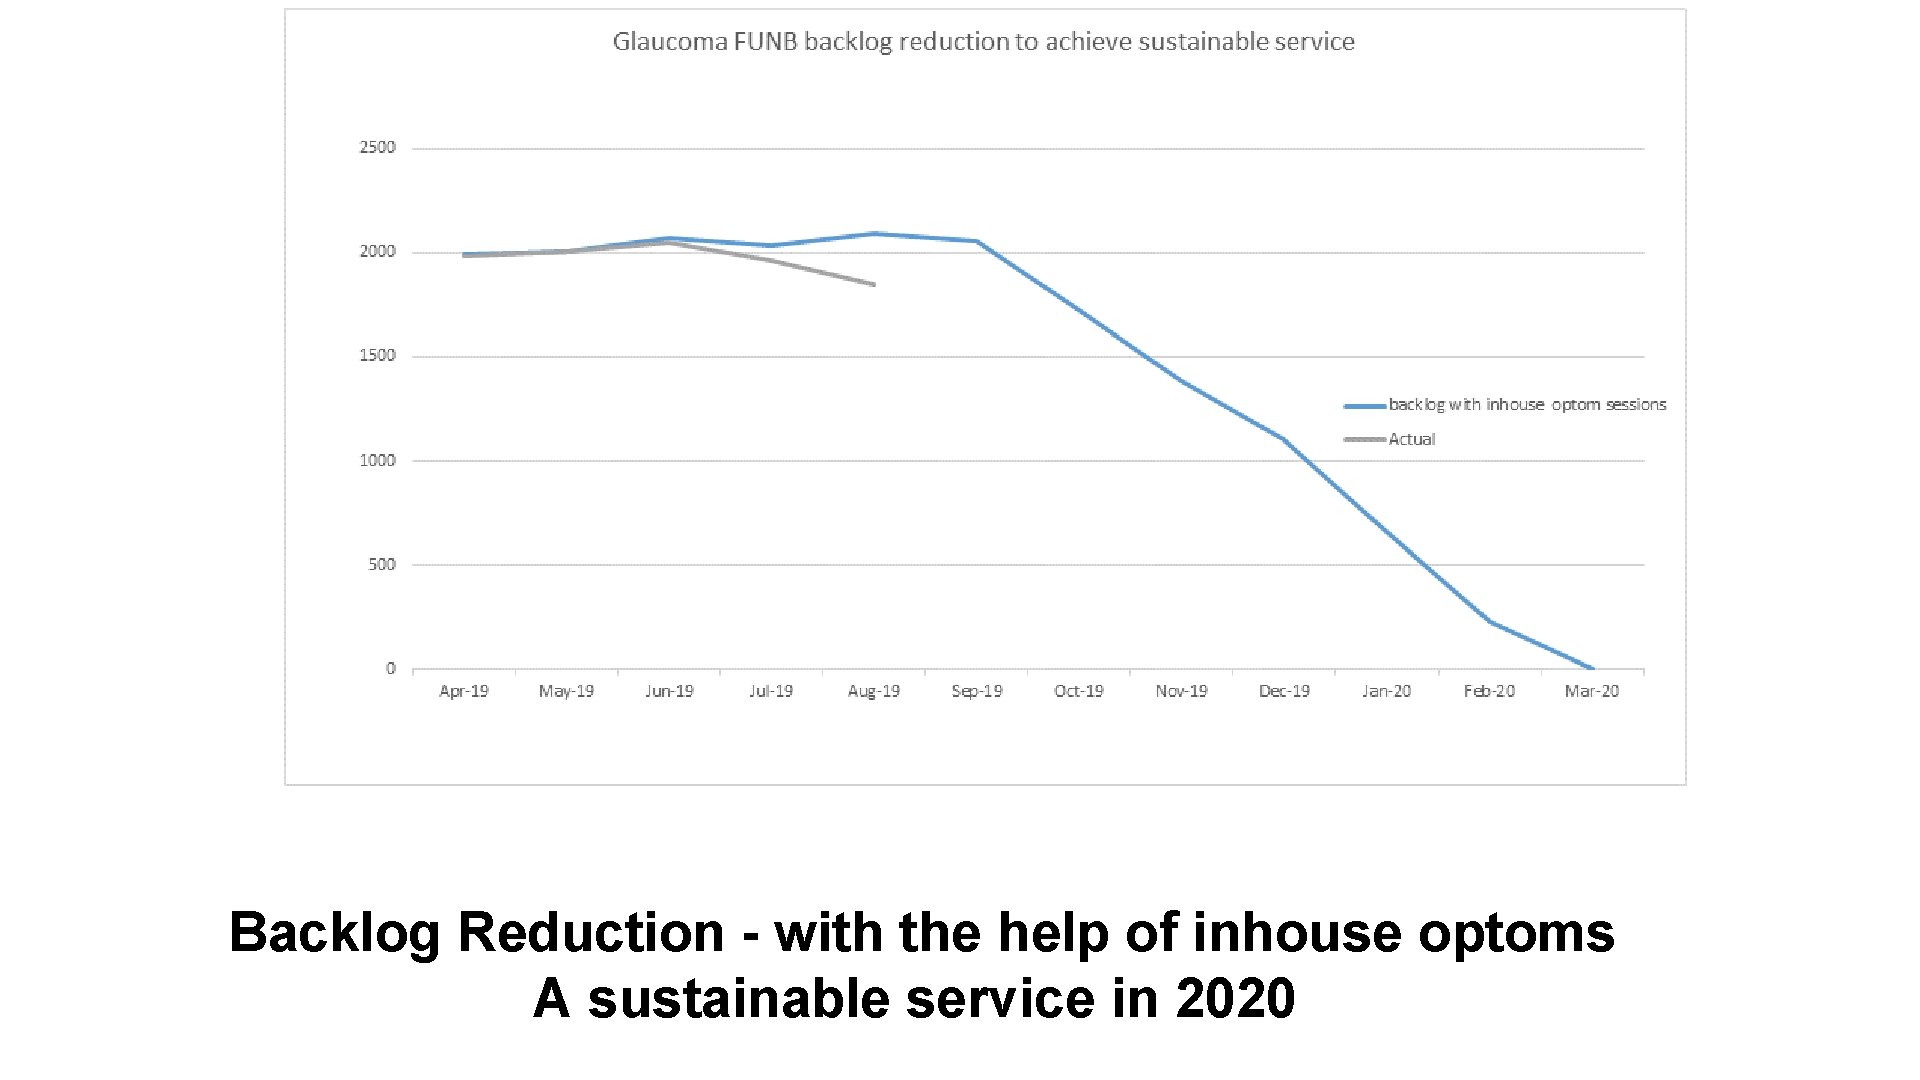 Backlog Reduction - with the help of inhouse optoms A sustainable service in 2020